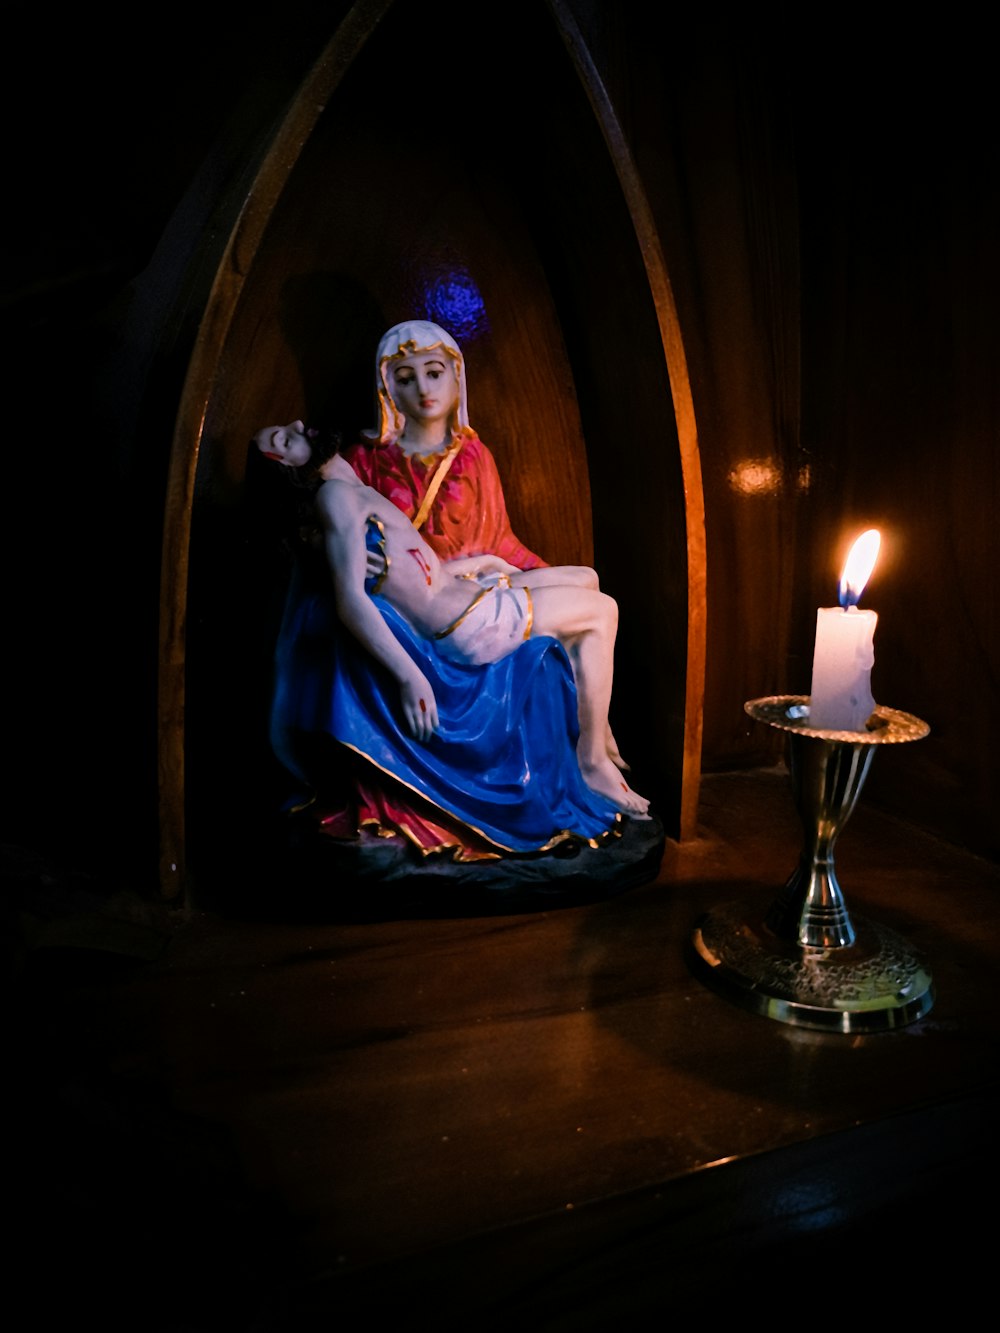 a statue of a person sitting next to a candle